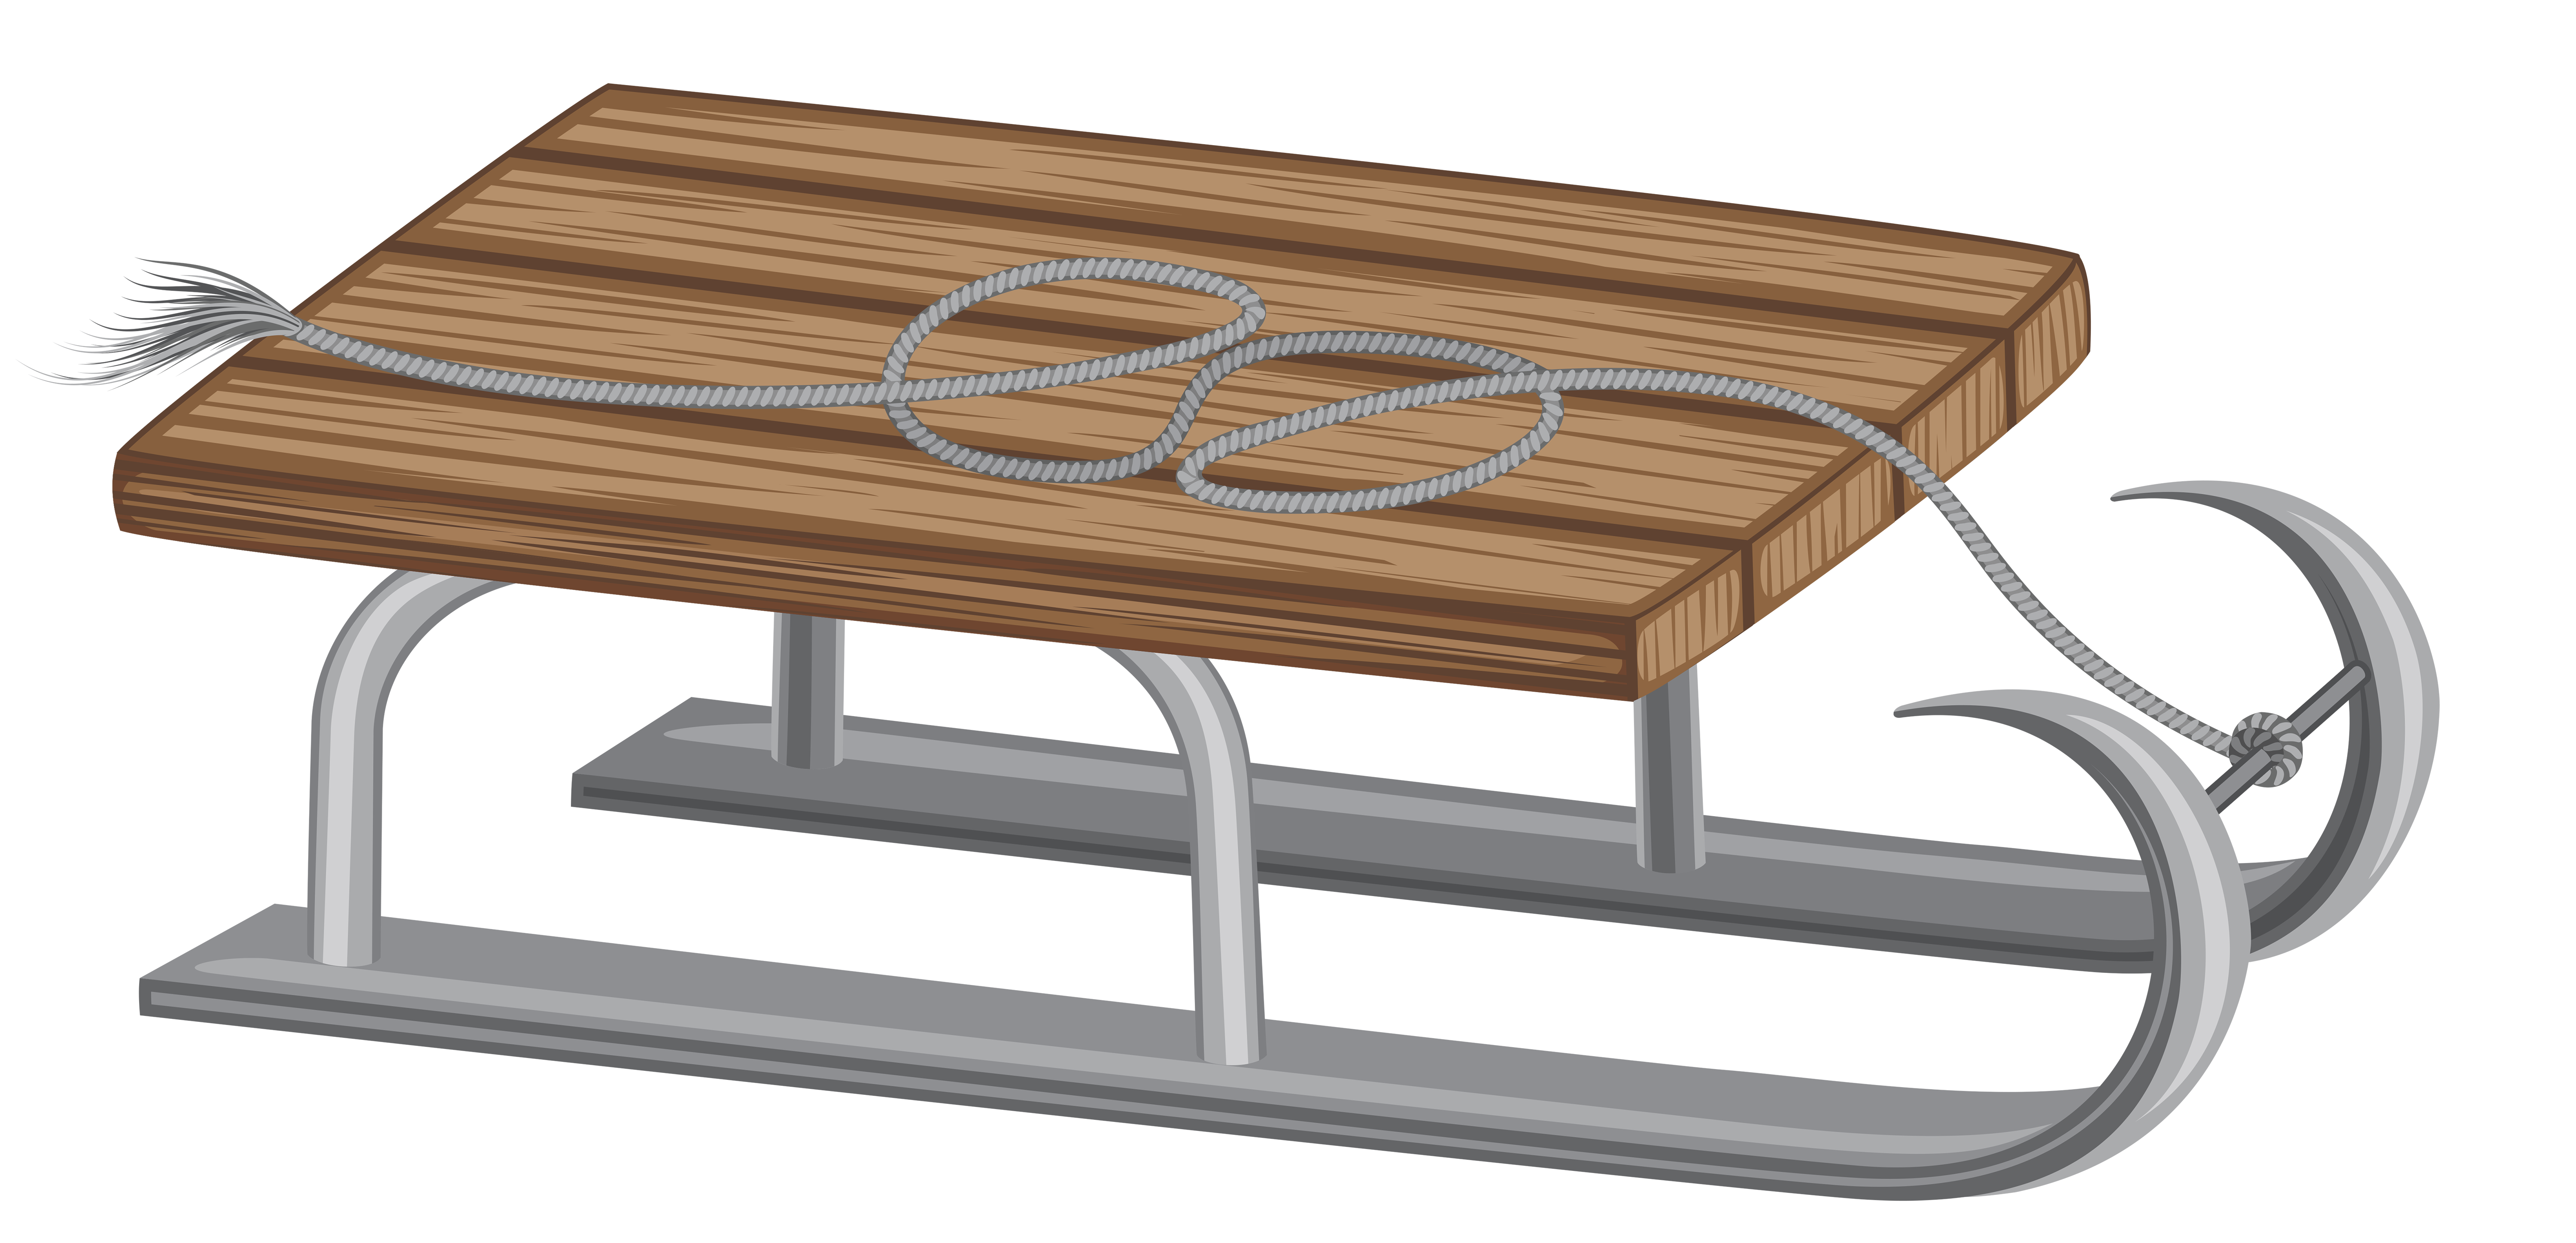 Wooden Sled Clipart